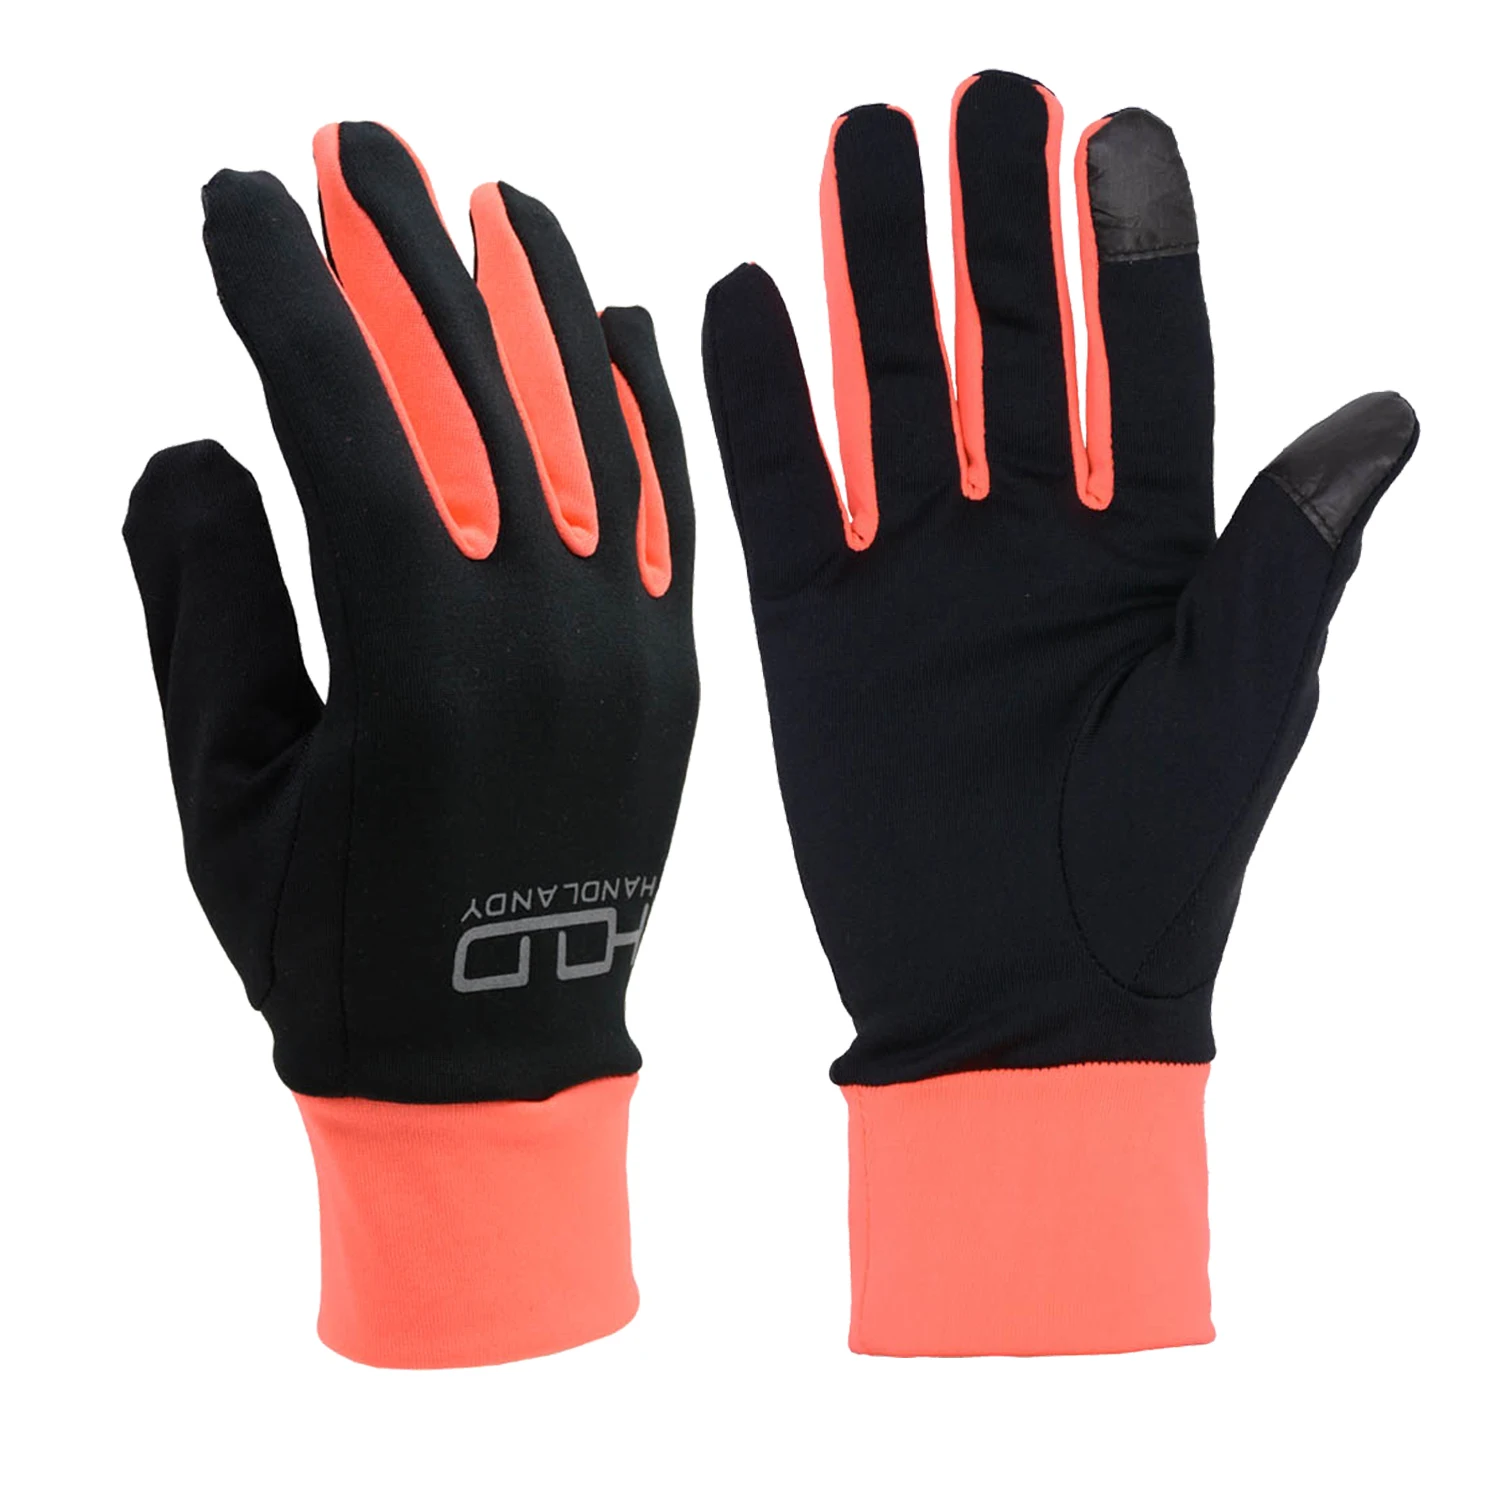 

HANDLANDY High Quality 4-way Stretch Fabric Lightweight Running Gloves with Touch Screen Sports Hand Protection Gloves, Black pink